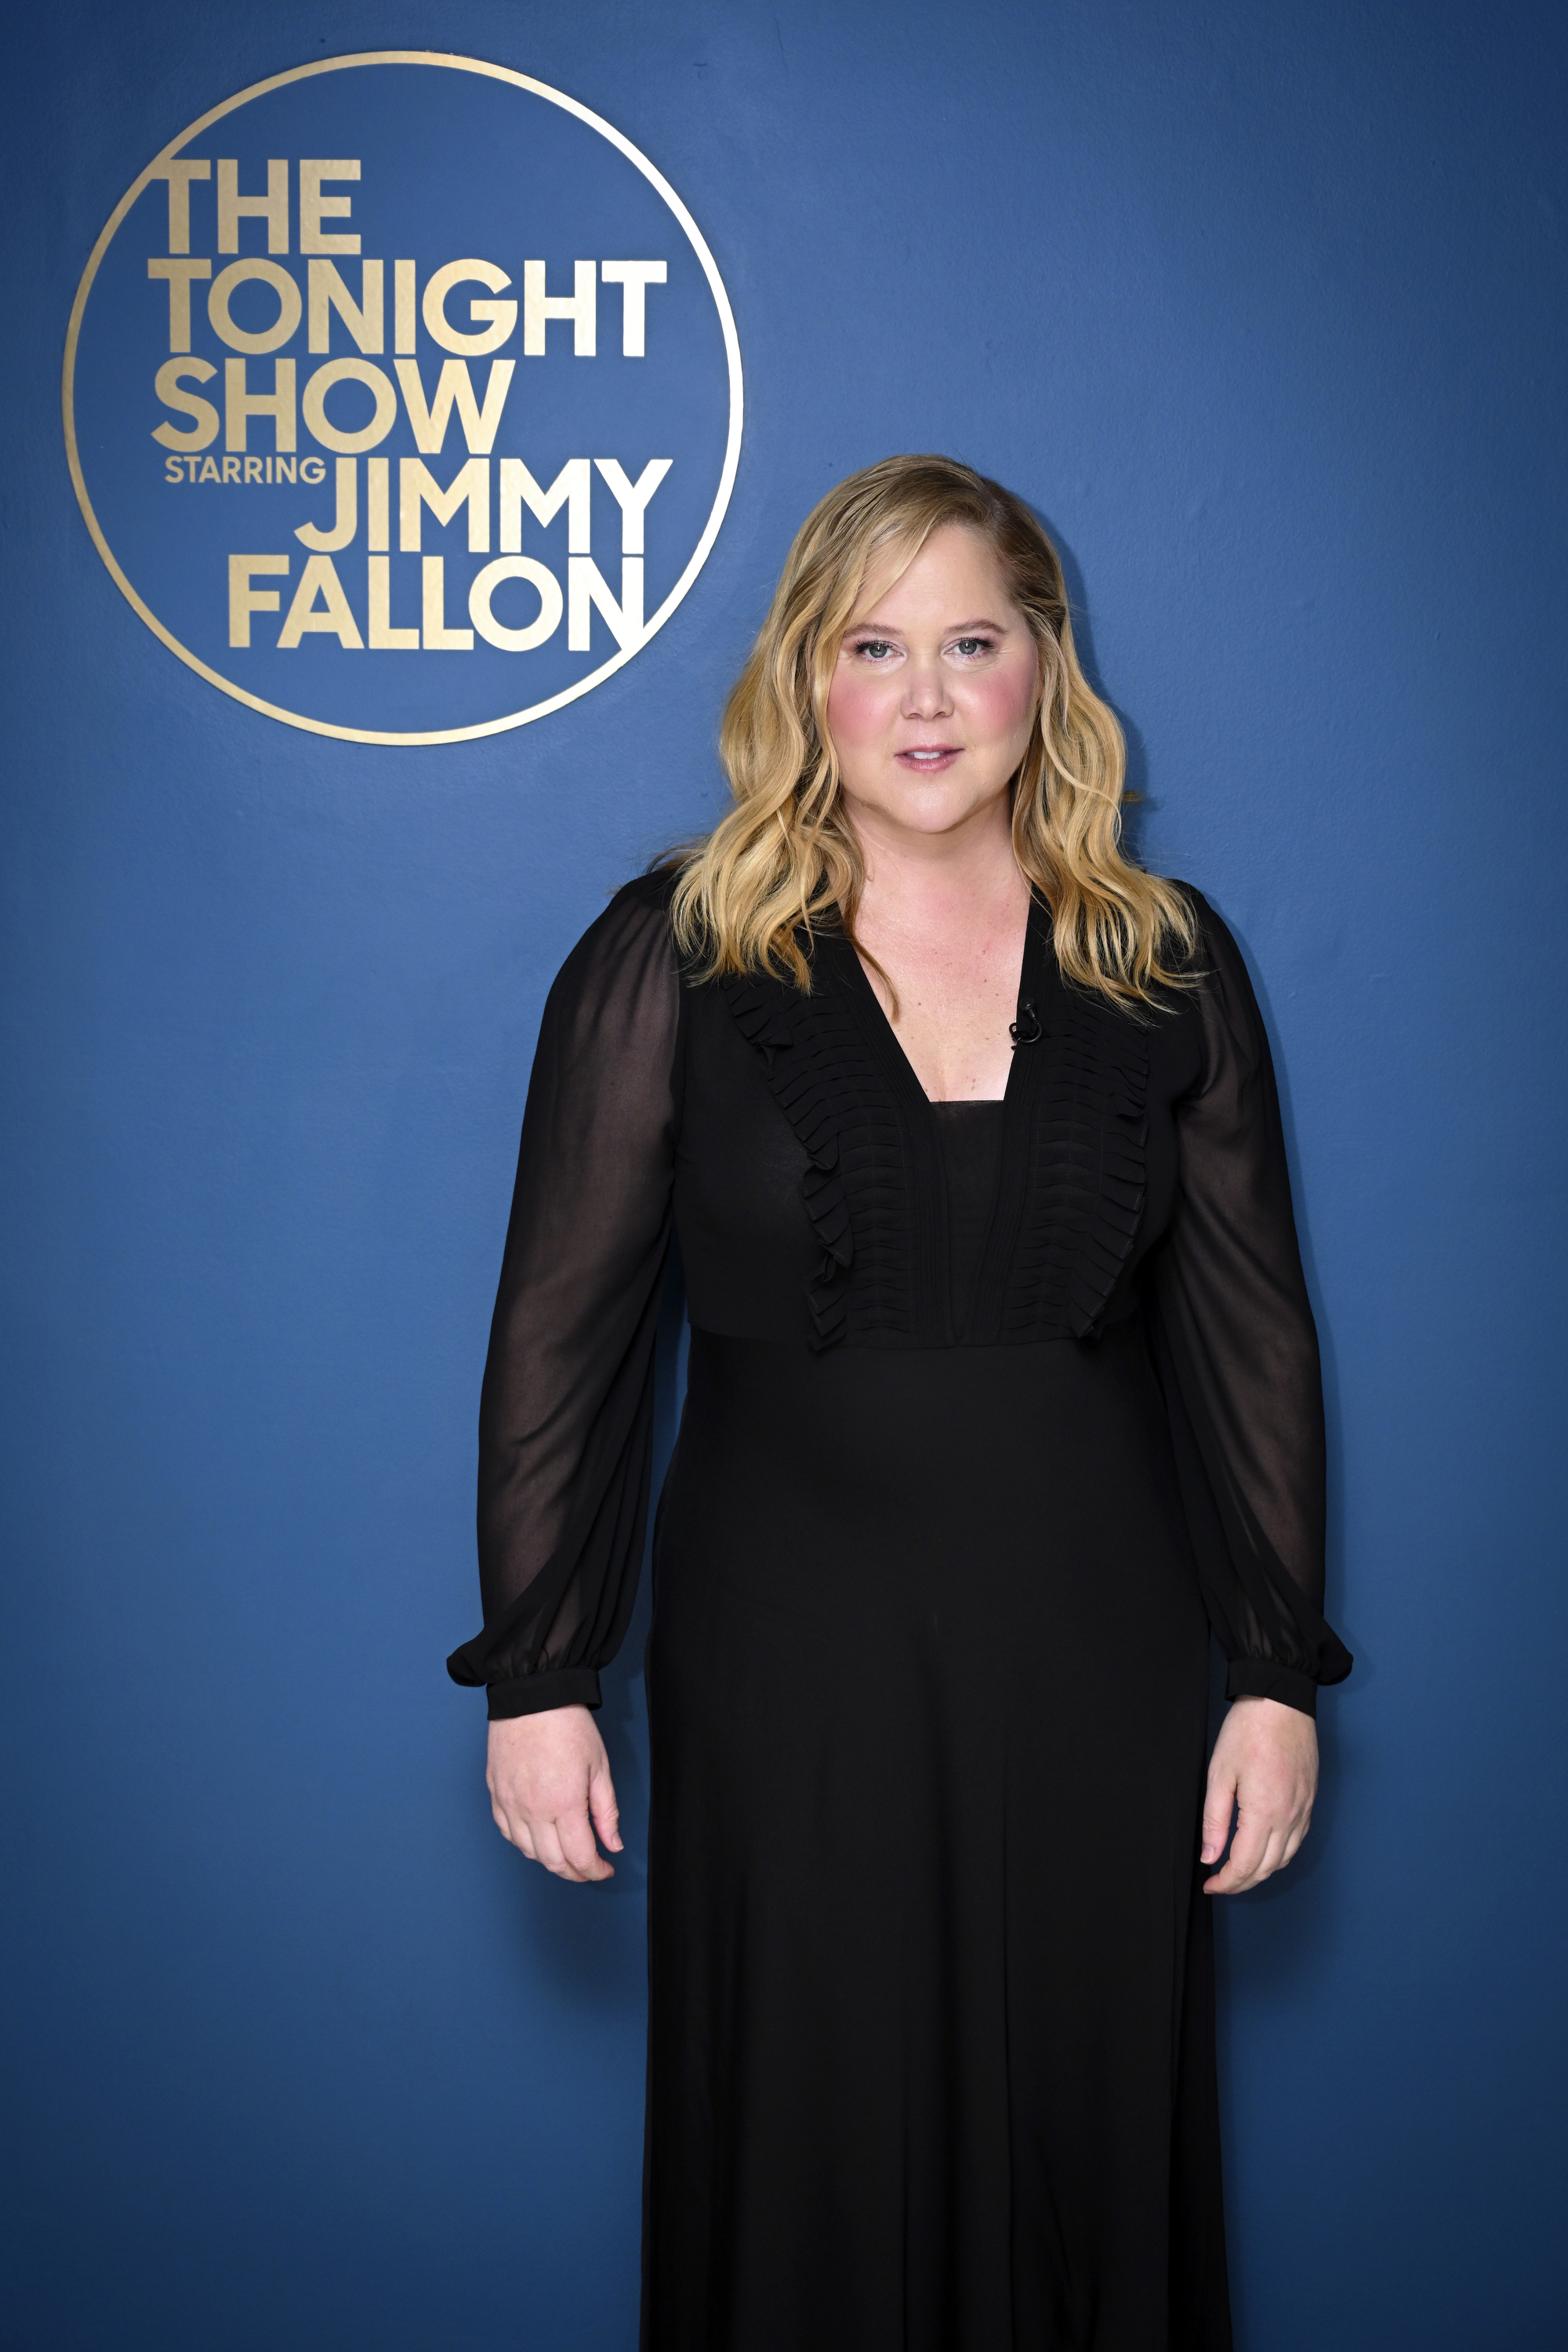 Amy Schumer stands in front of &#x27;The Tonight Show&#x27; backdrop wearing a black dress with sheer sleeves